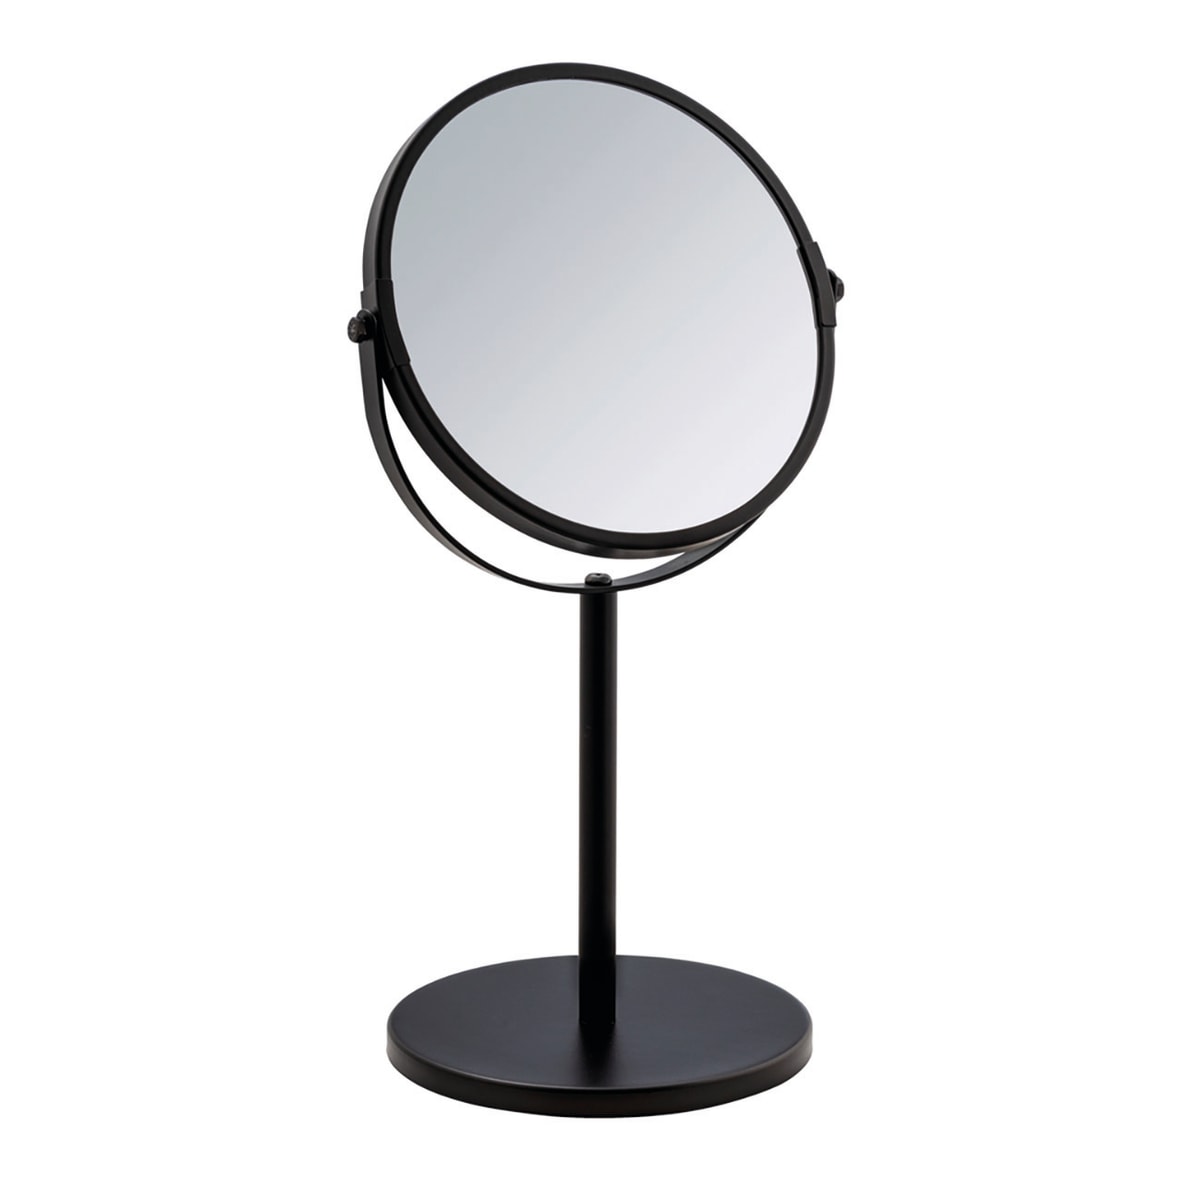 BLACK STAND-UP MAGNIFYING MIRROR ASSISI